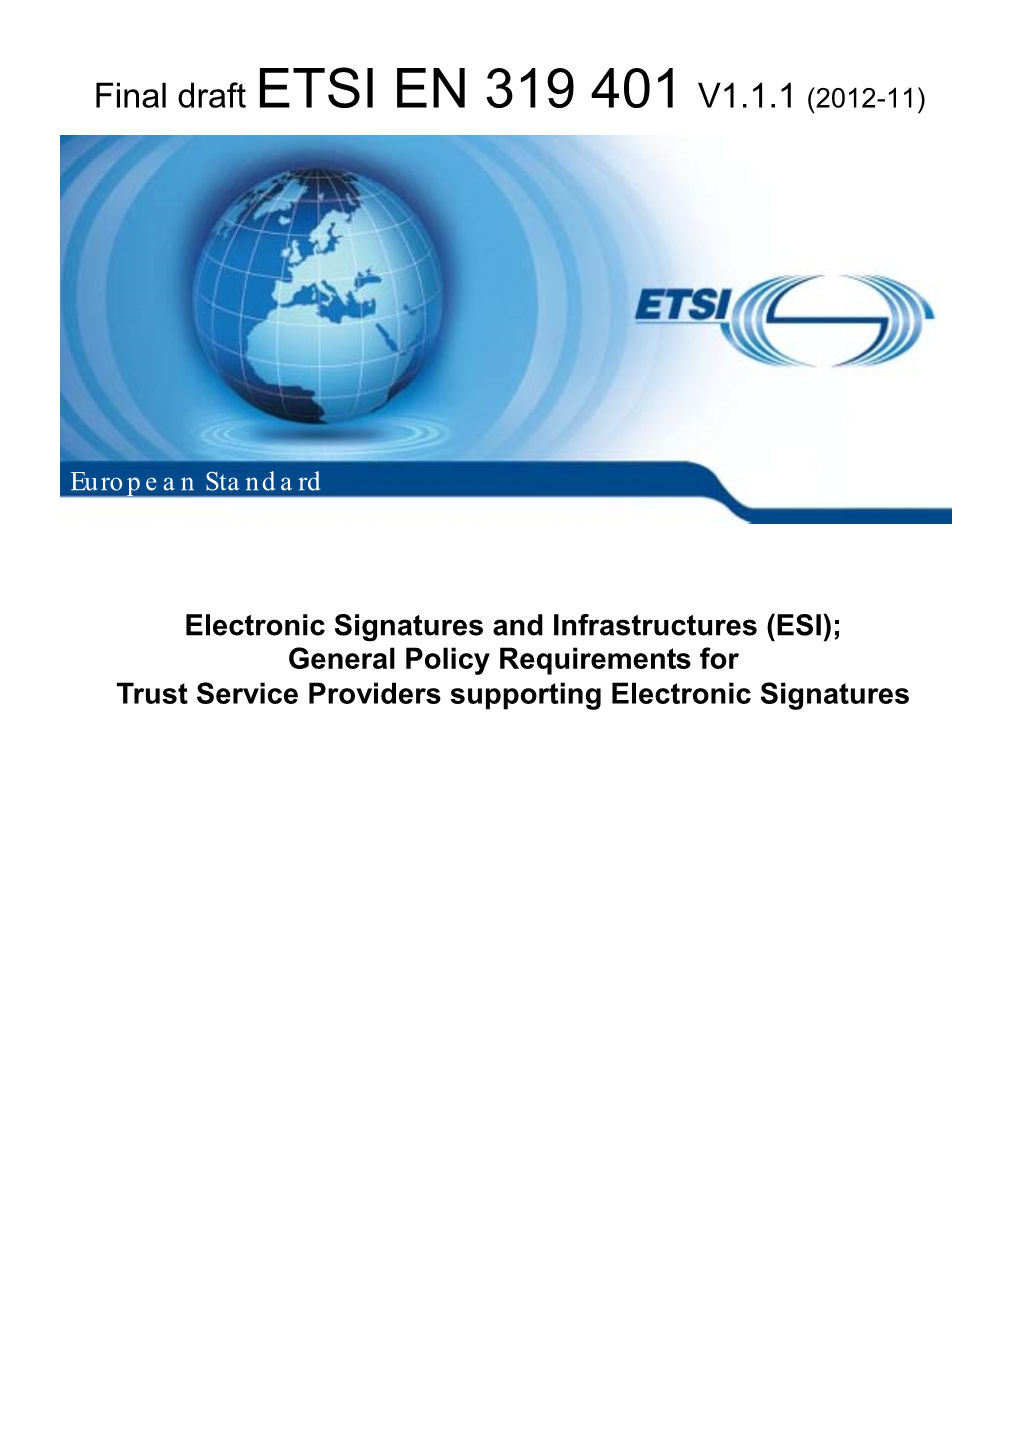 (ESI); General Policy Requirements for Trust Service Providers Supporting Electronic Signatures